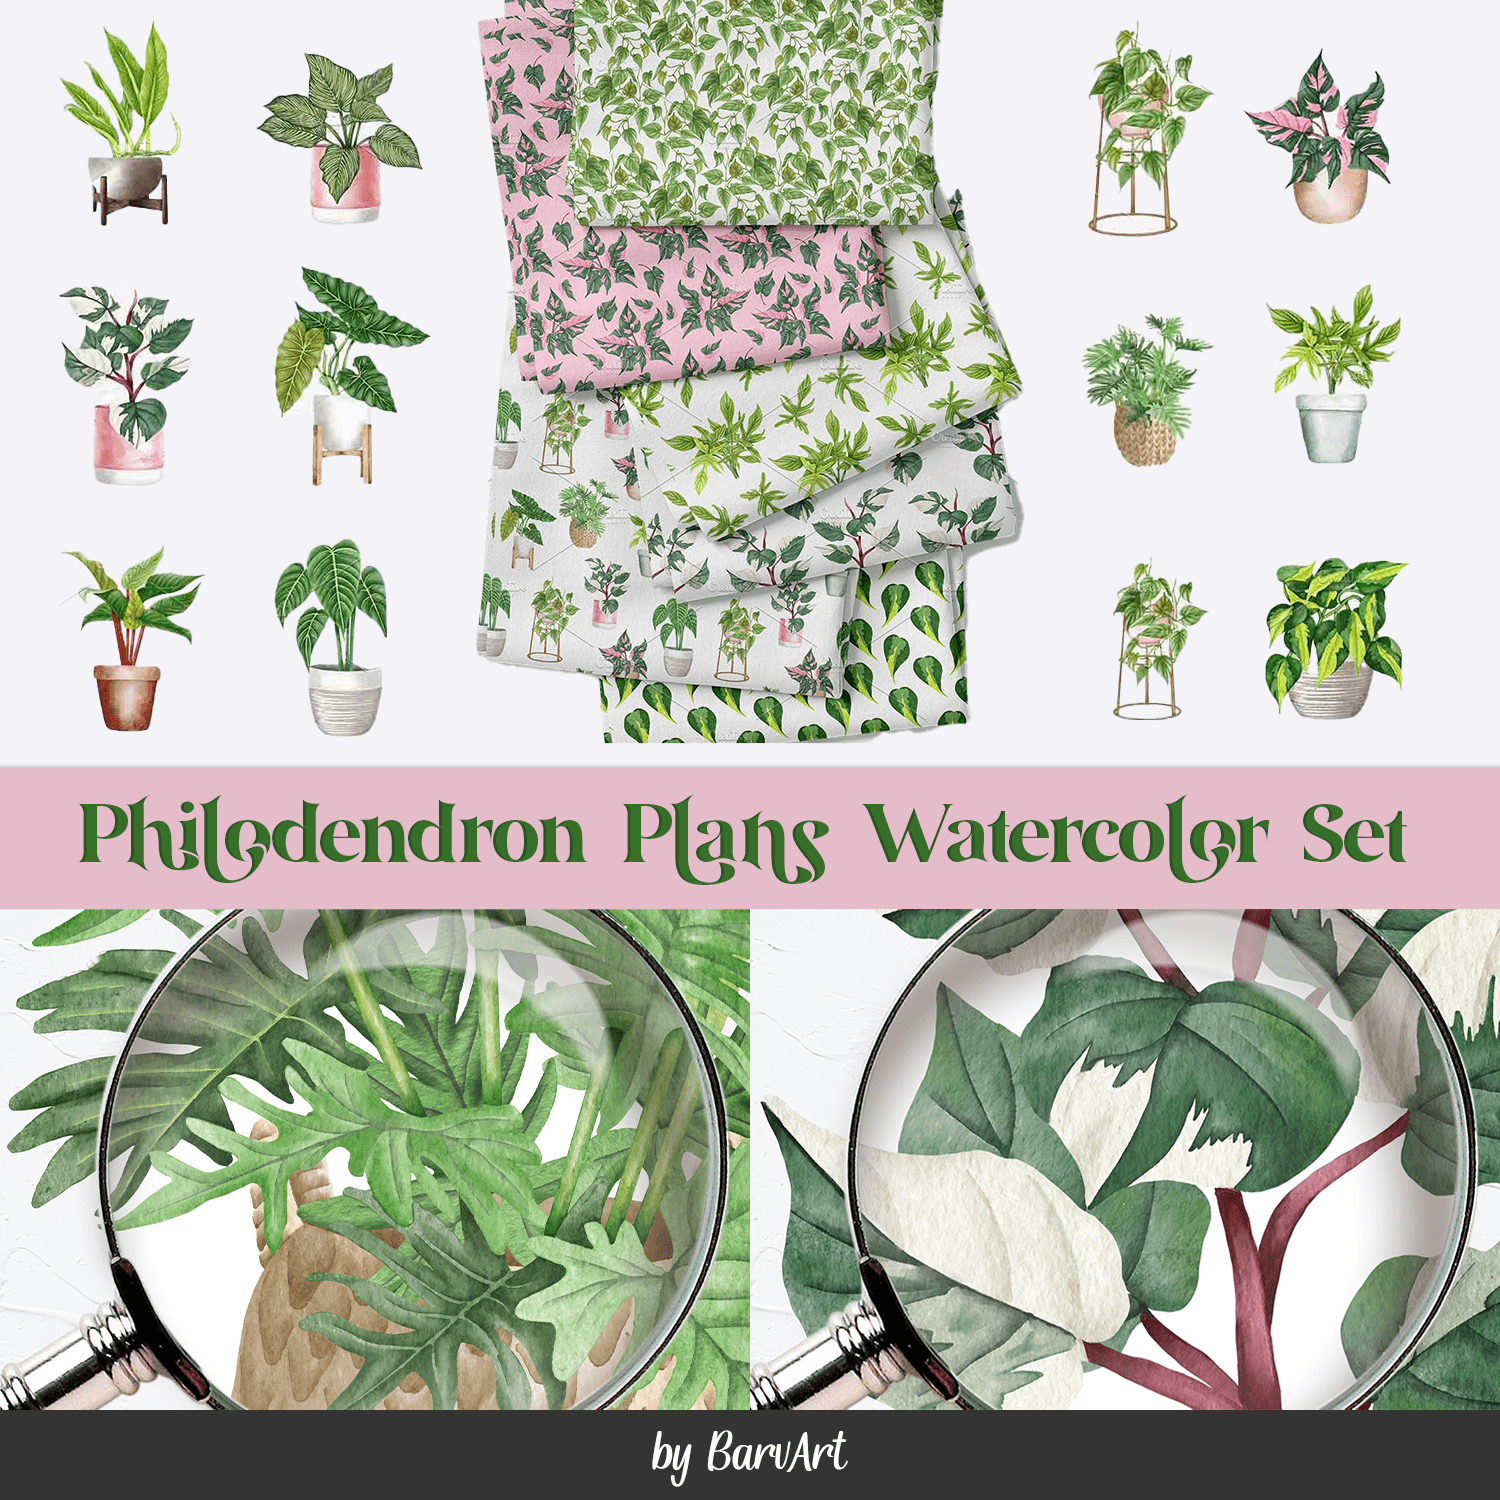 Philodendron Plans Watercolor Set cover.